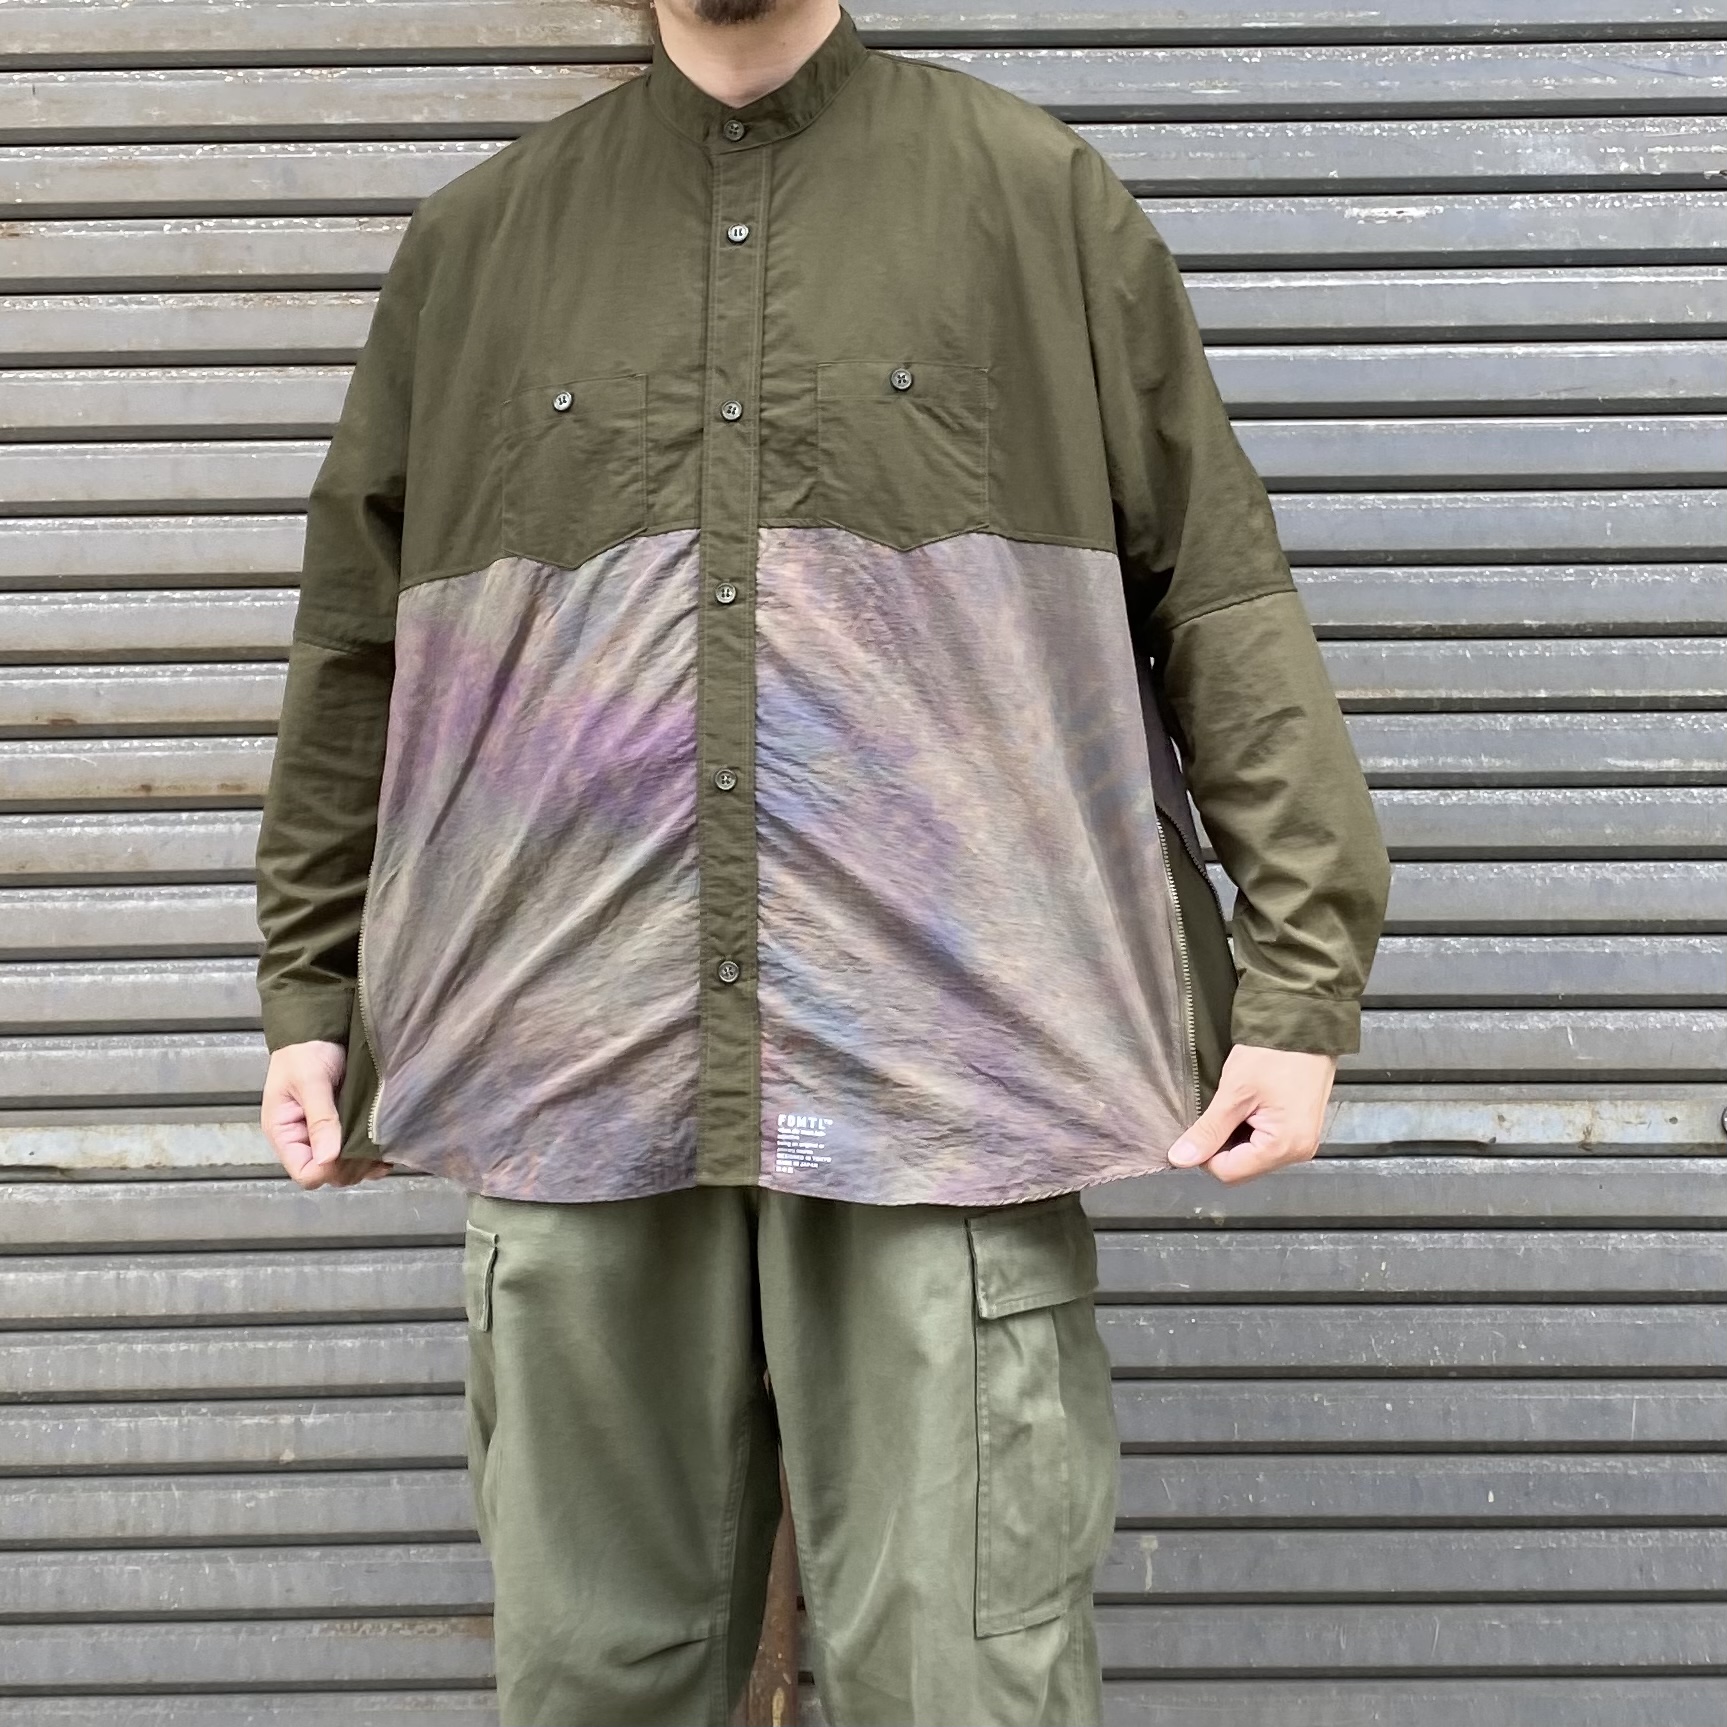 Read more about the article 【FDMTL】SIDE ZIP OVERSIZED SHIRT 新型入荷しました。